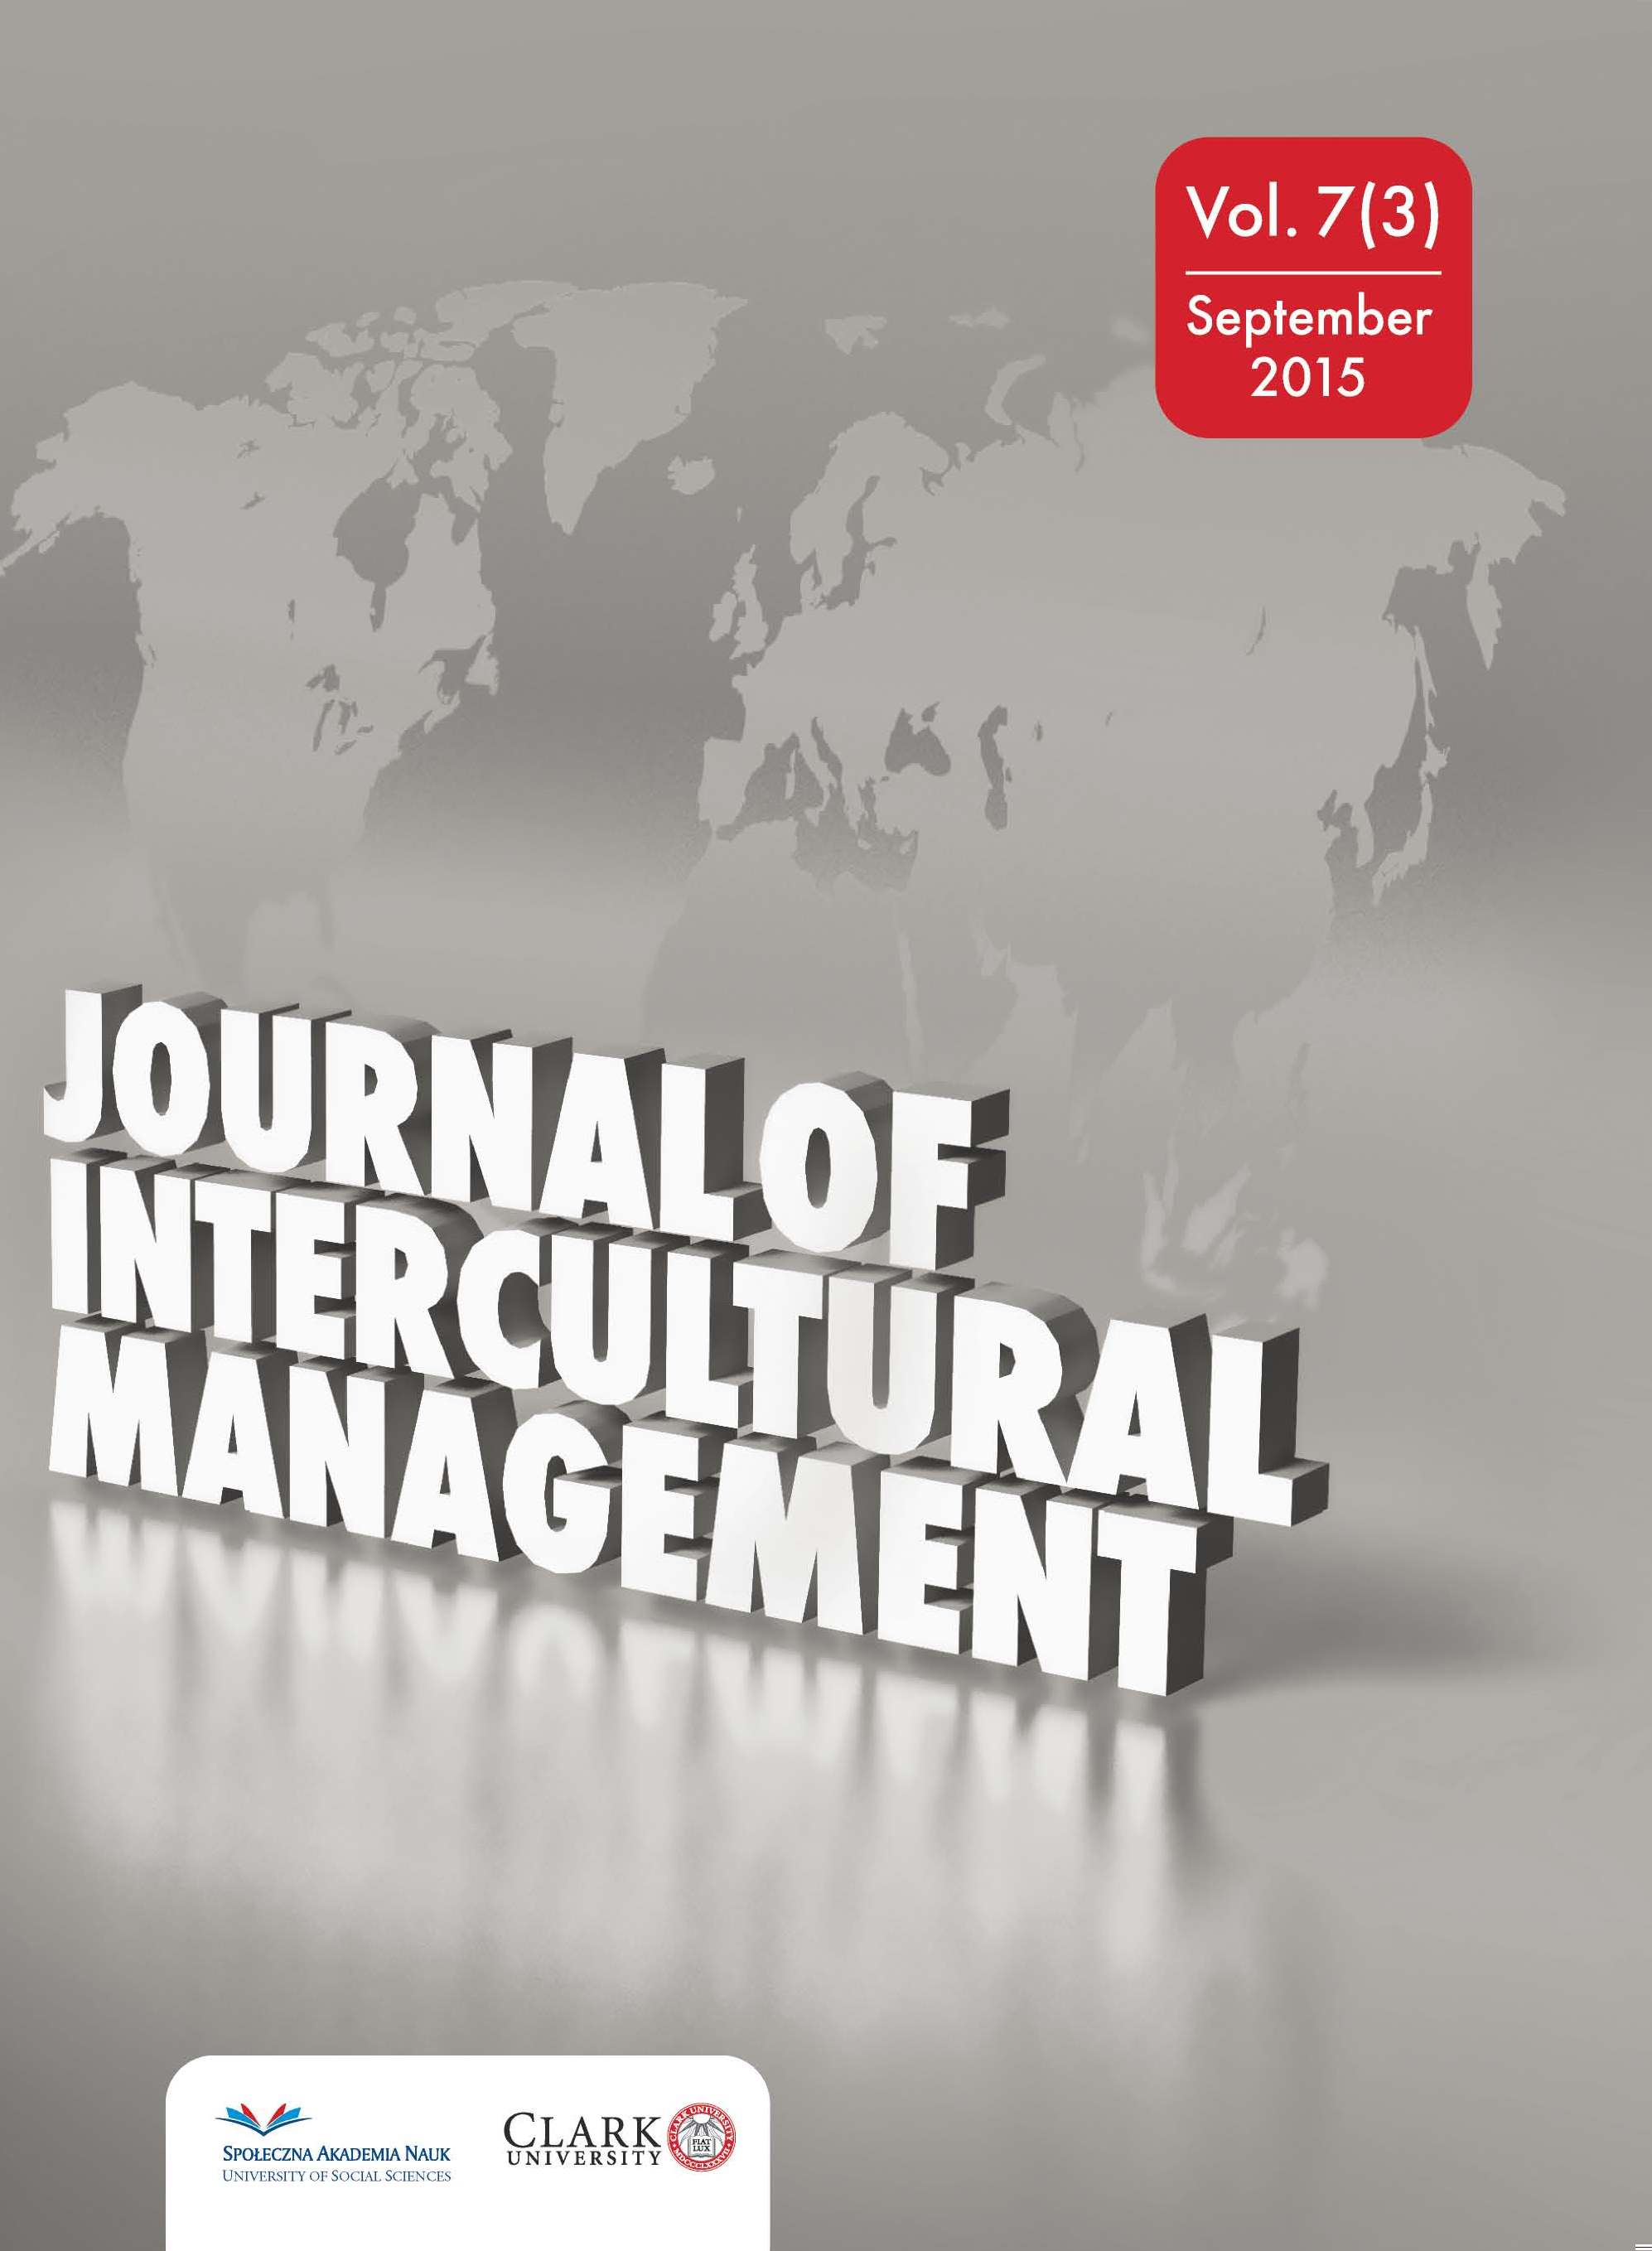 Intercultural Project Management for IT: Issues and Challenges